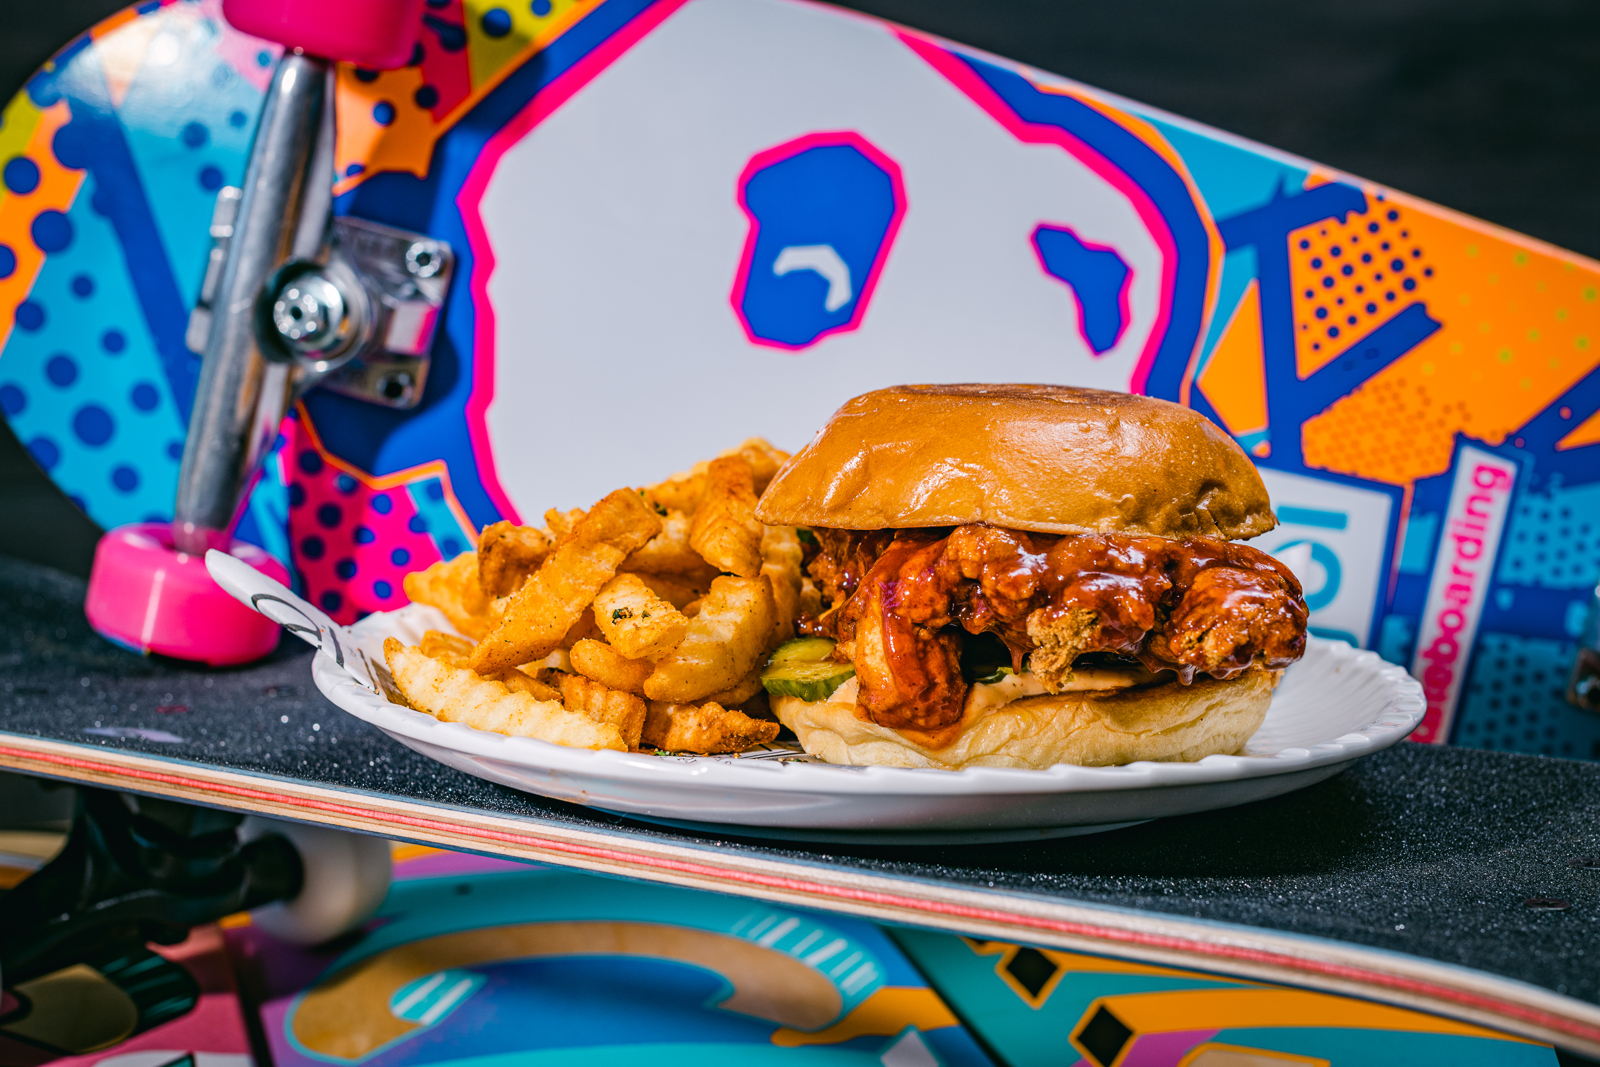 A plate and sandwich in front of a skateboard | Bethesda, MD | Oceanside, CA